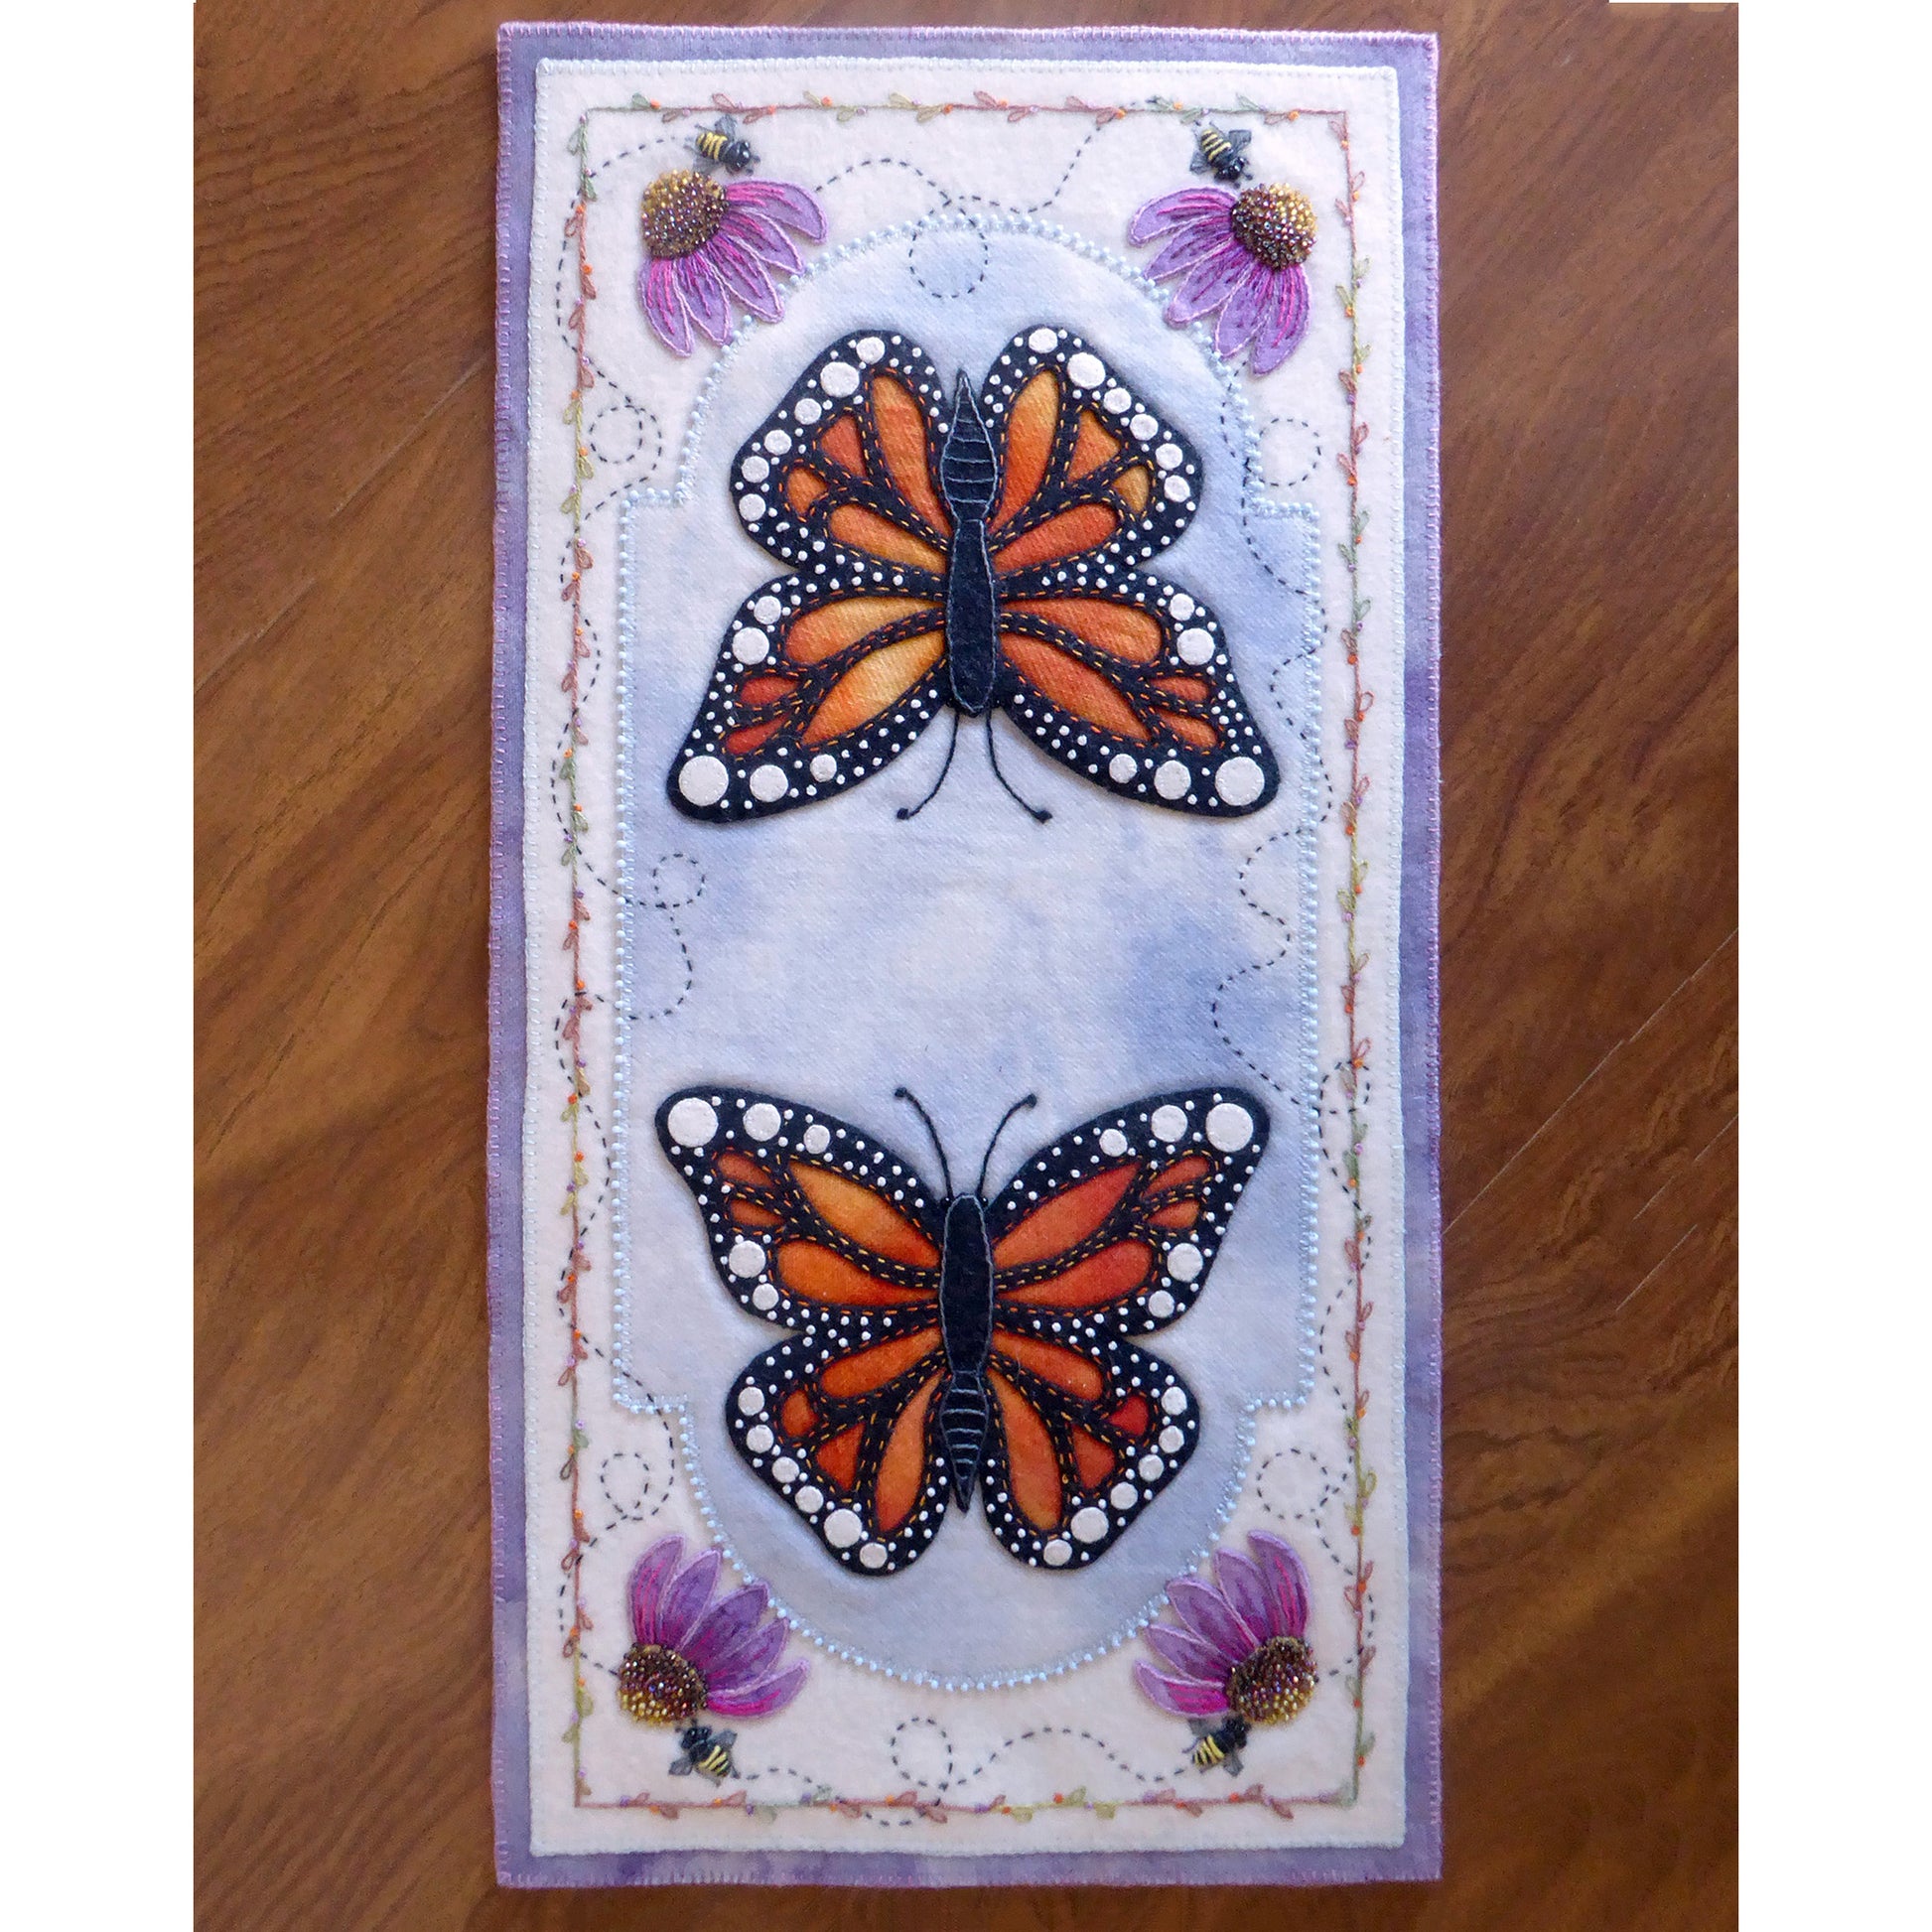 A table runner adorned with two delicate butterflies fluttering gracefully with flowers and bees.